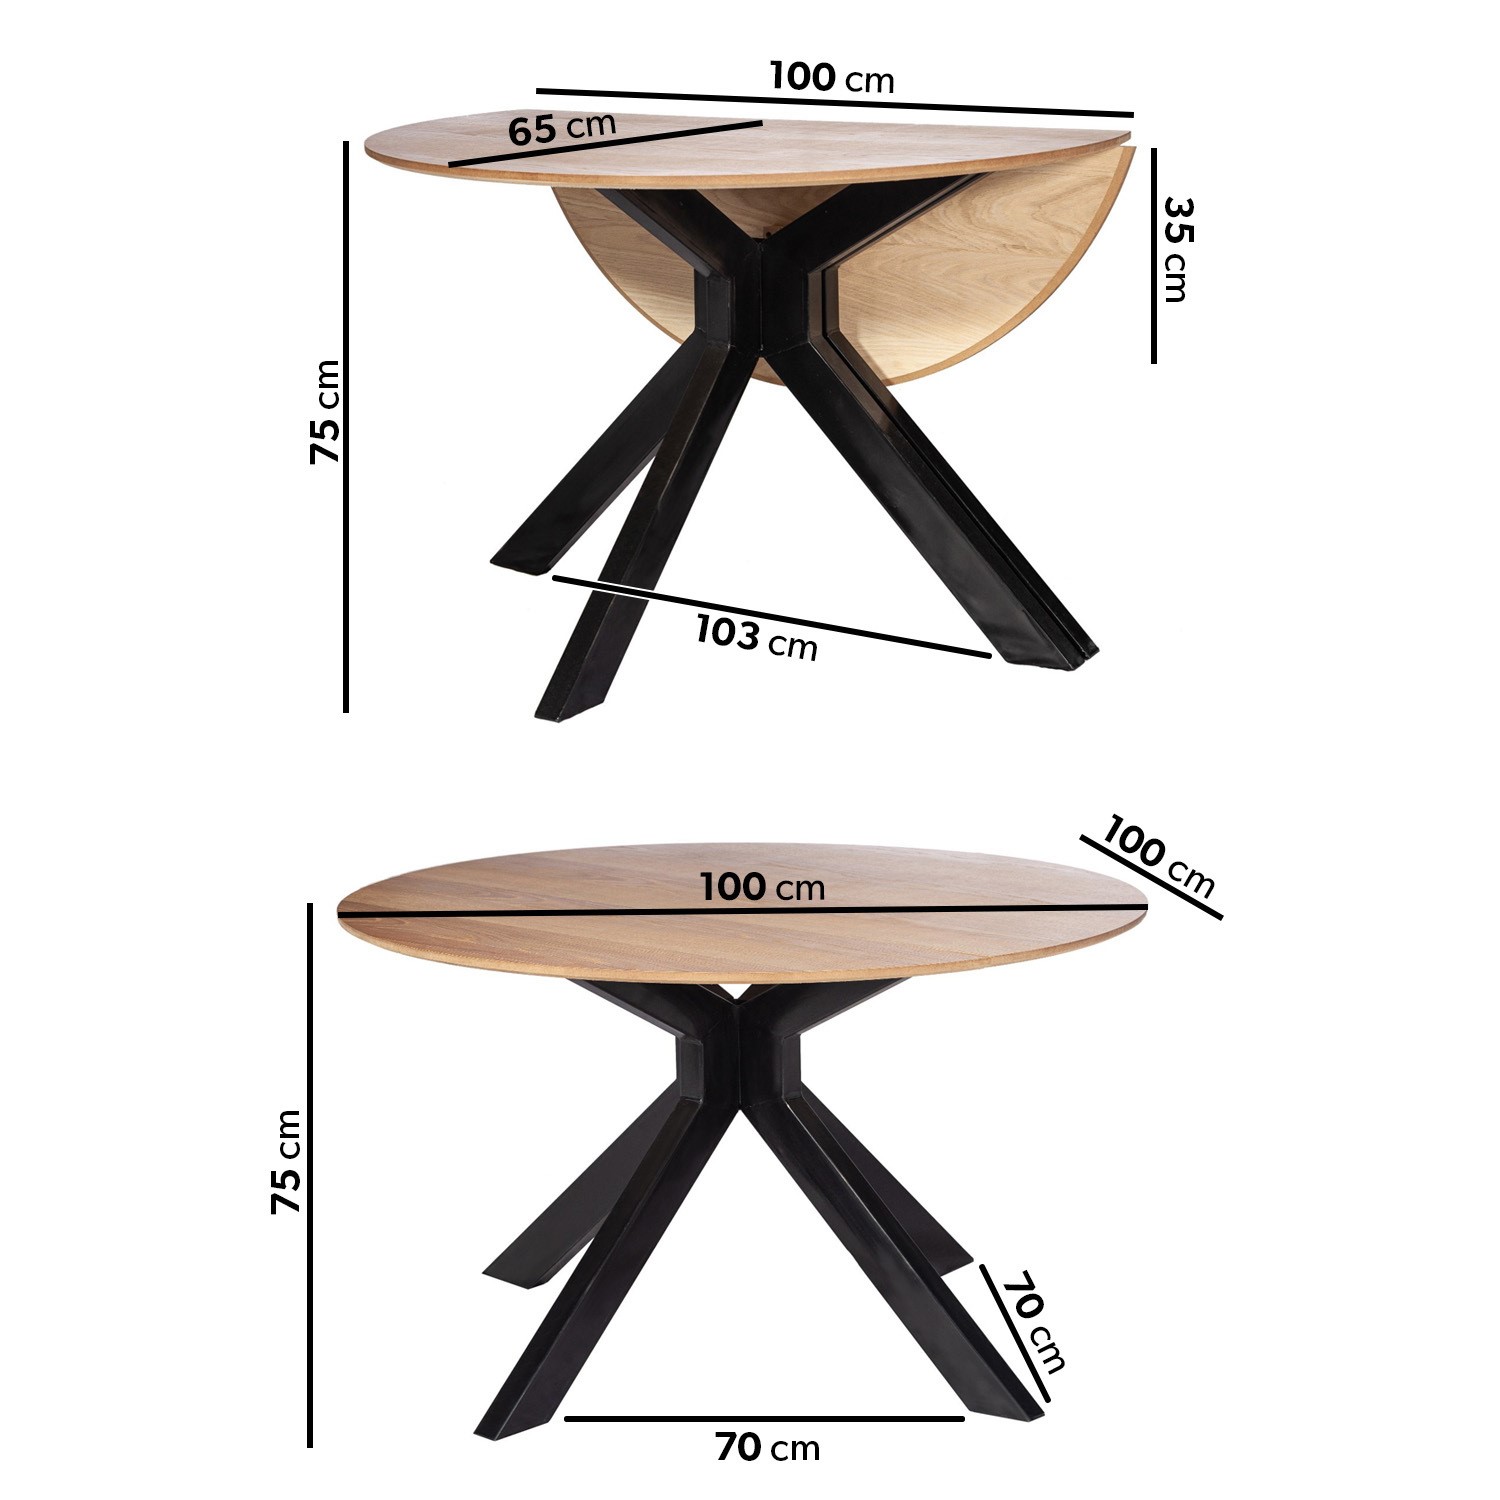 Read more about Small light oak drop leaf space saving round dining table seats 2-4 carson